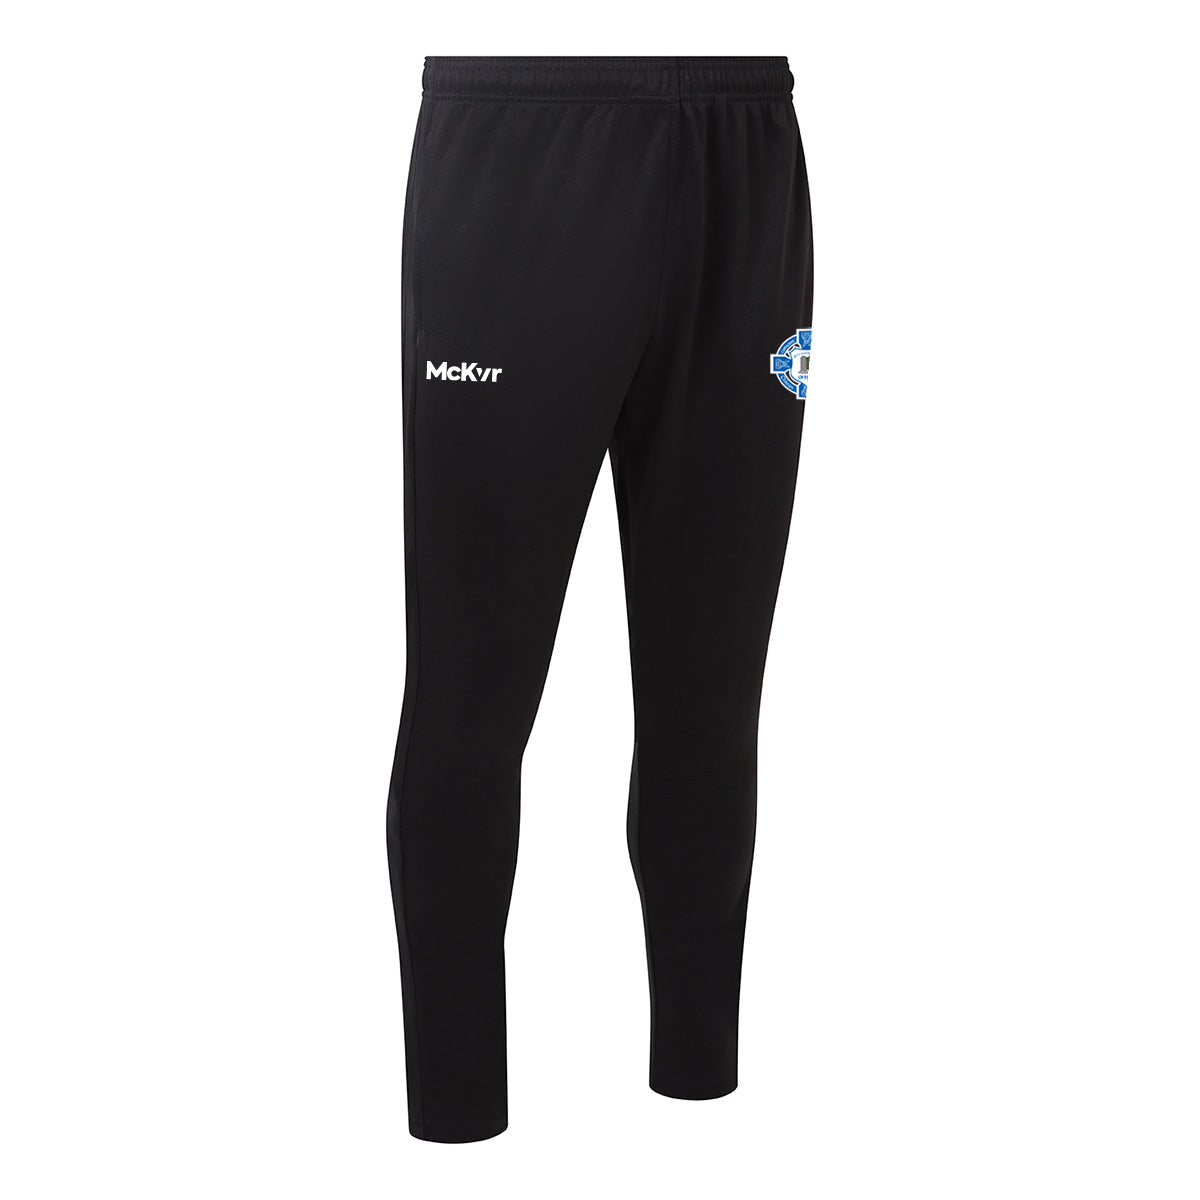 Mc Keever Glen Rovers Armoy Core 22 Skinny Pants - Youth - Black